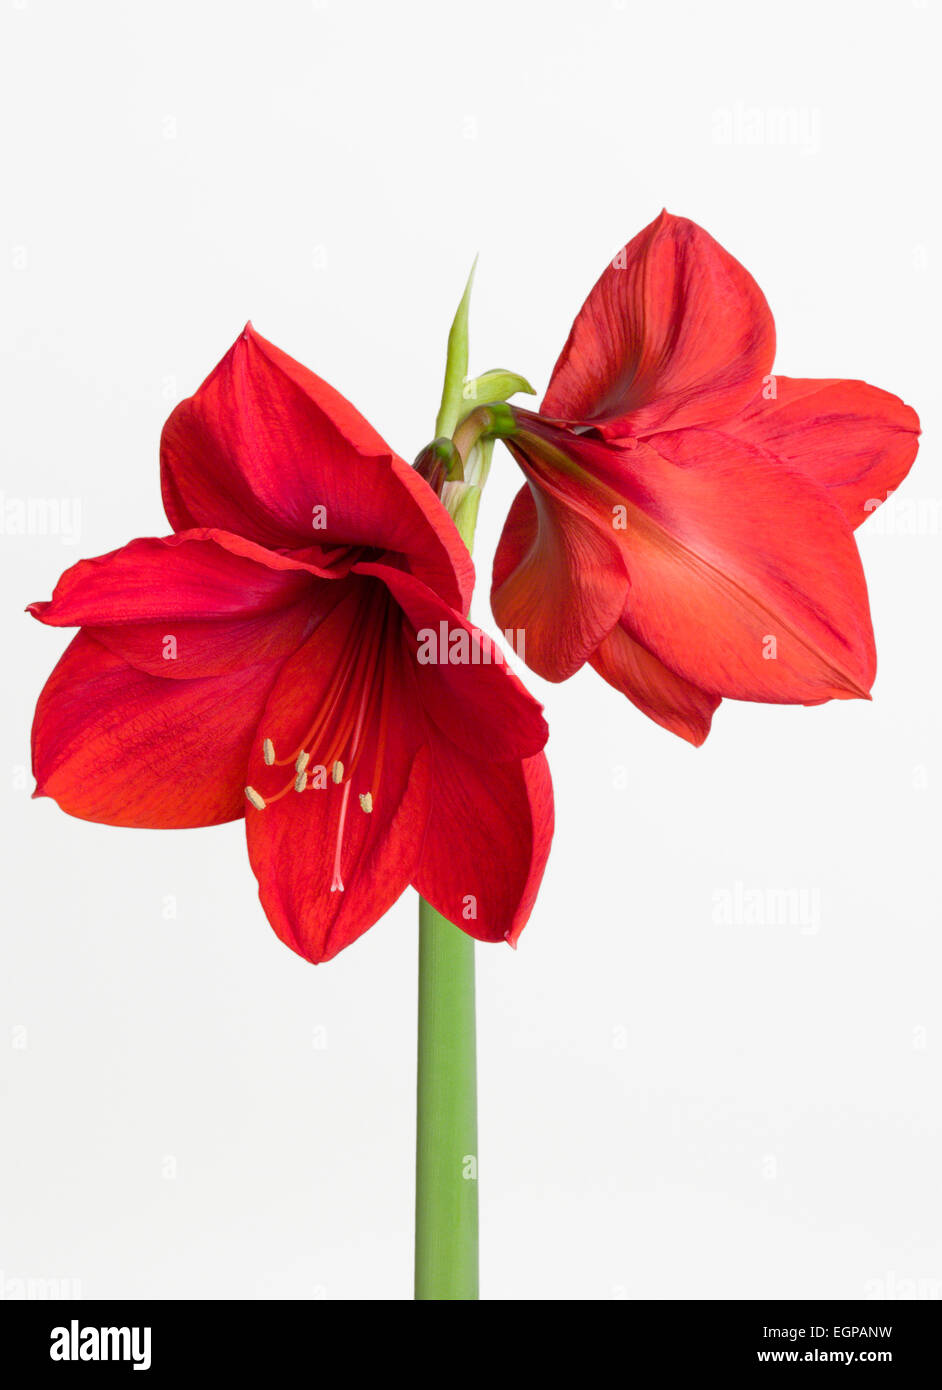 Amaryllis, Hippeastrum 'Red Lion', Two red flowers on a long stem against a white background. Stock Photo